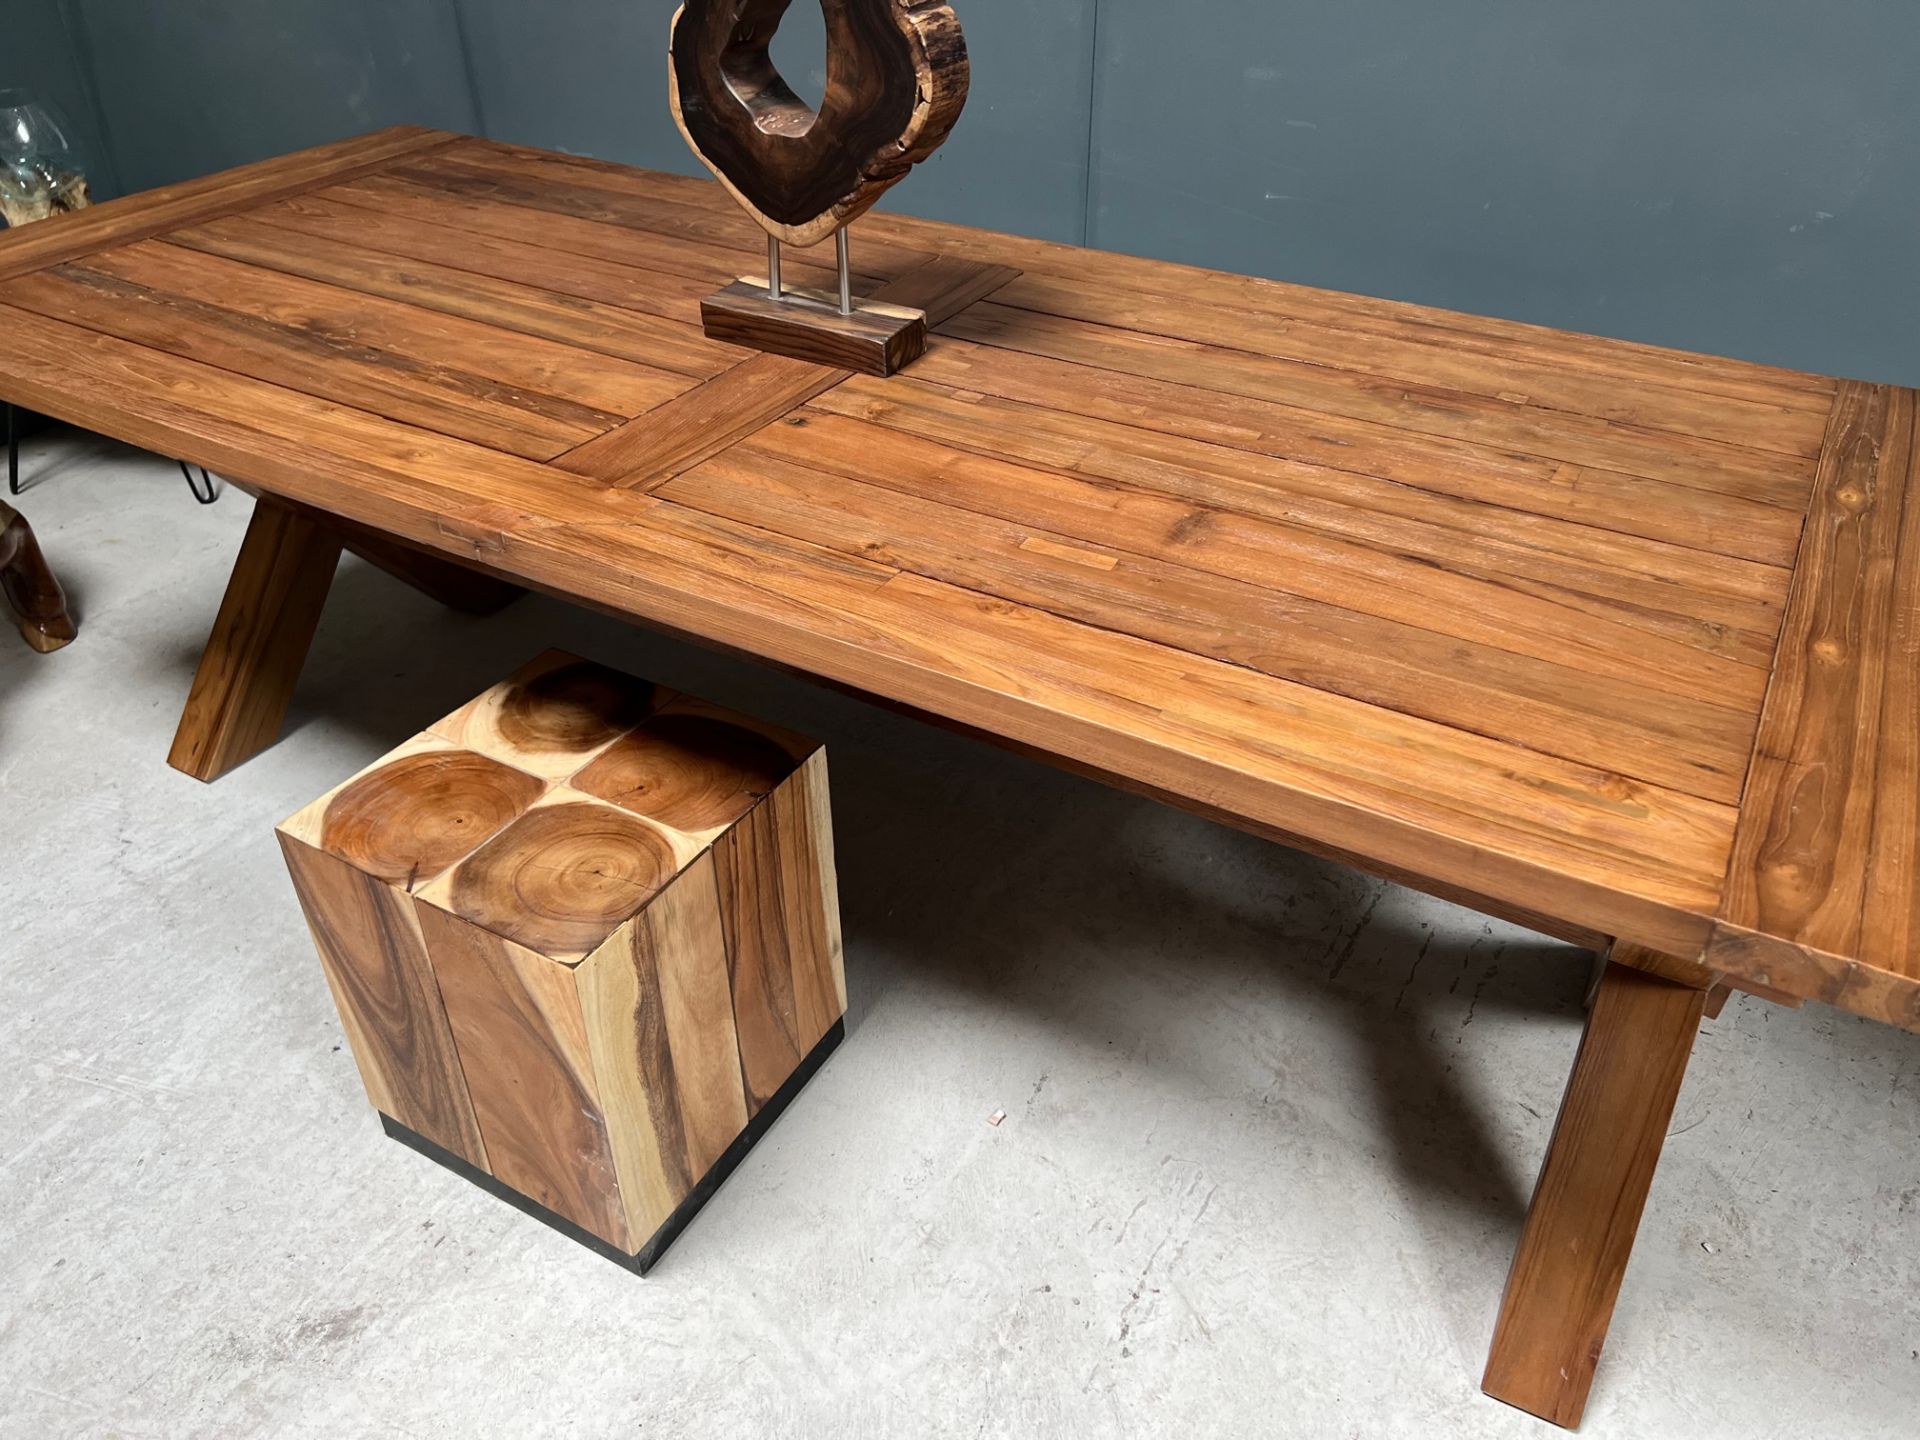 NEW PACKAGED HUGE 240CM RECYCLED TEAK DINING TABLE (APPROX 240CM LONG X 76CM TALL X 100CM WIDE) - Image 2 of 13